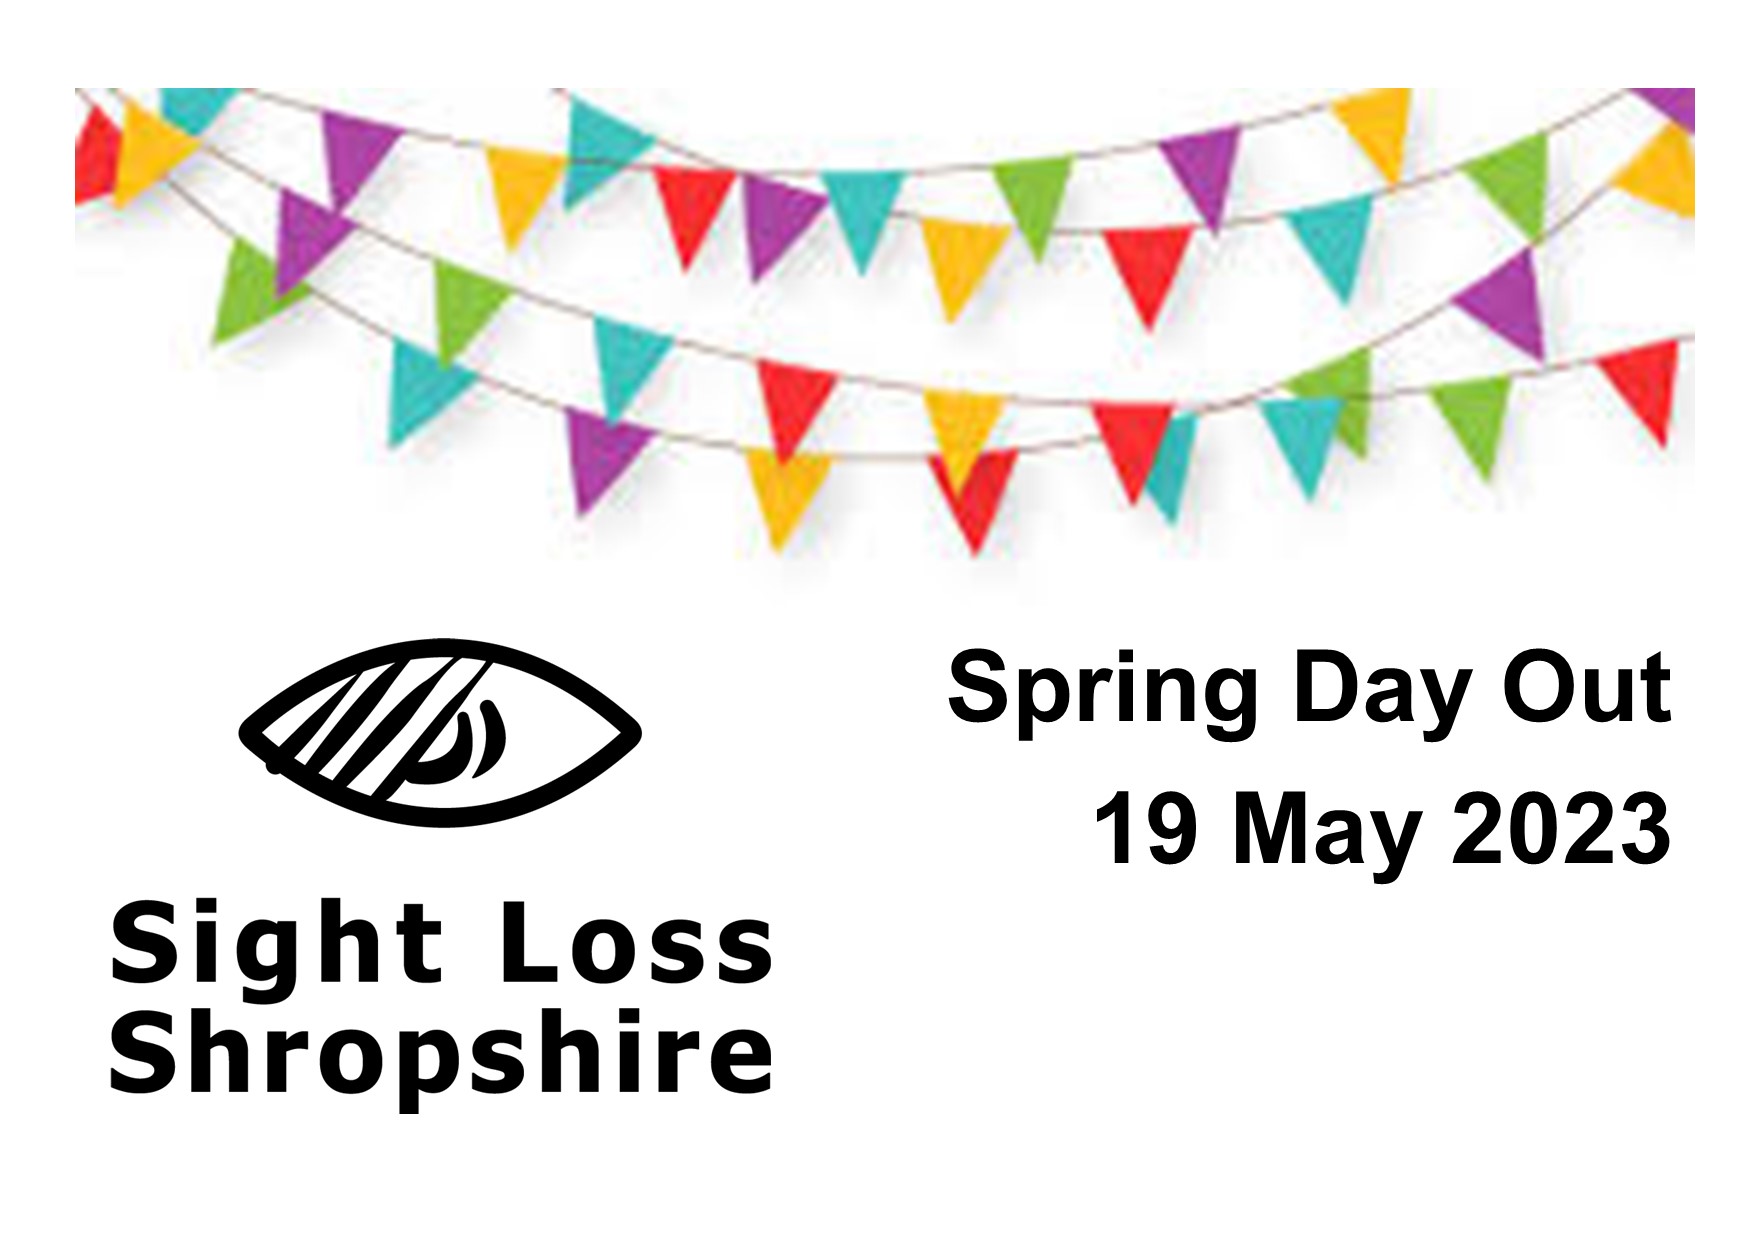 Sight Loss Shropshire to host Spring Day Out in 2023